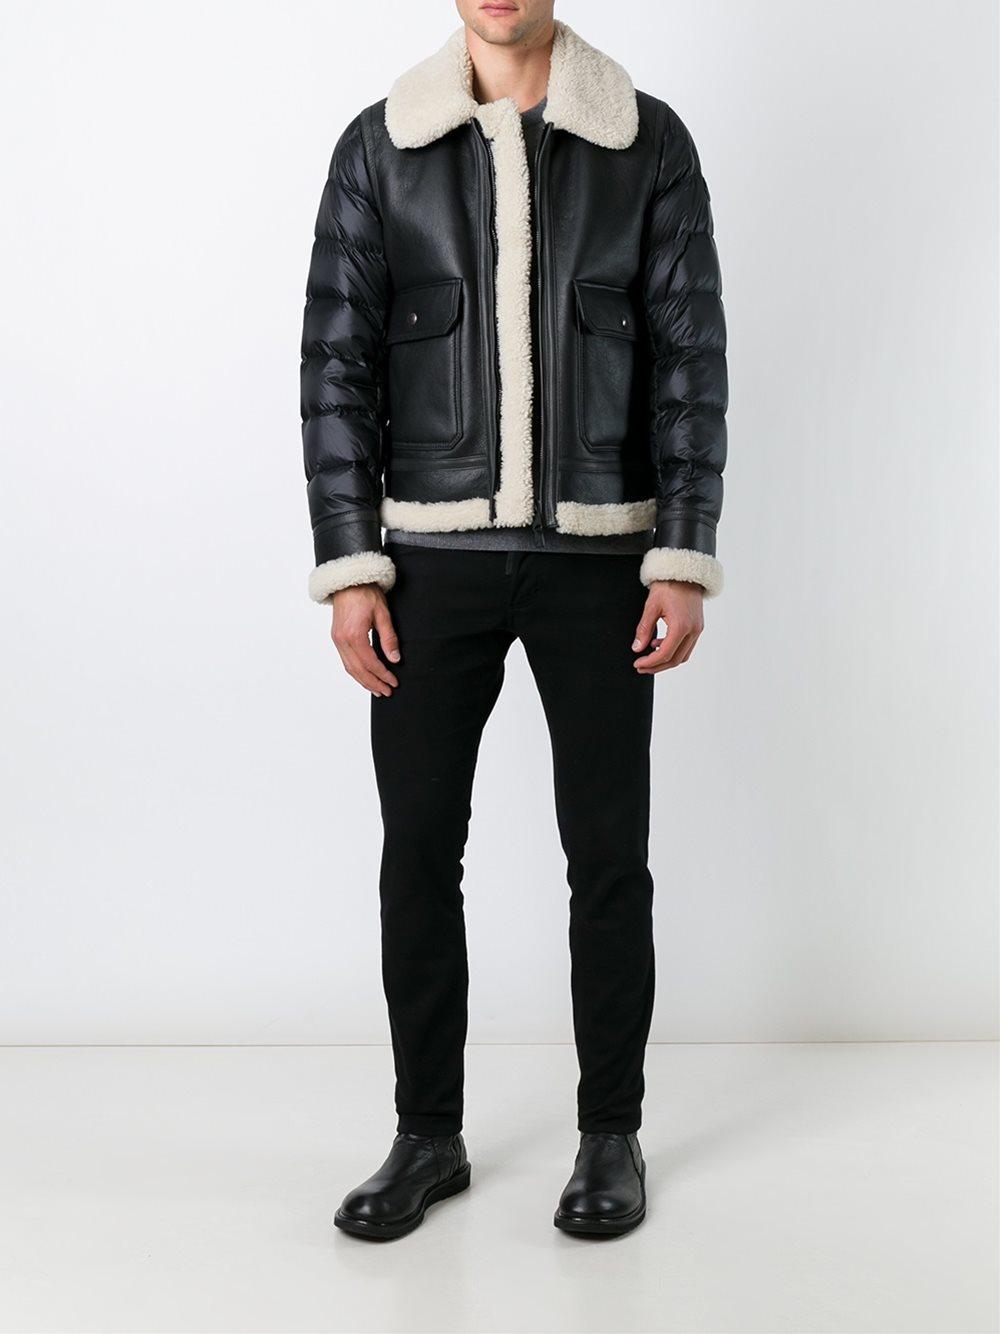 Lyst - Moncler Padded Sleeve Shearling Jacket in Brown for Men